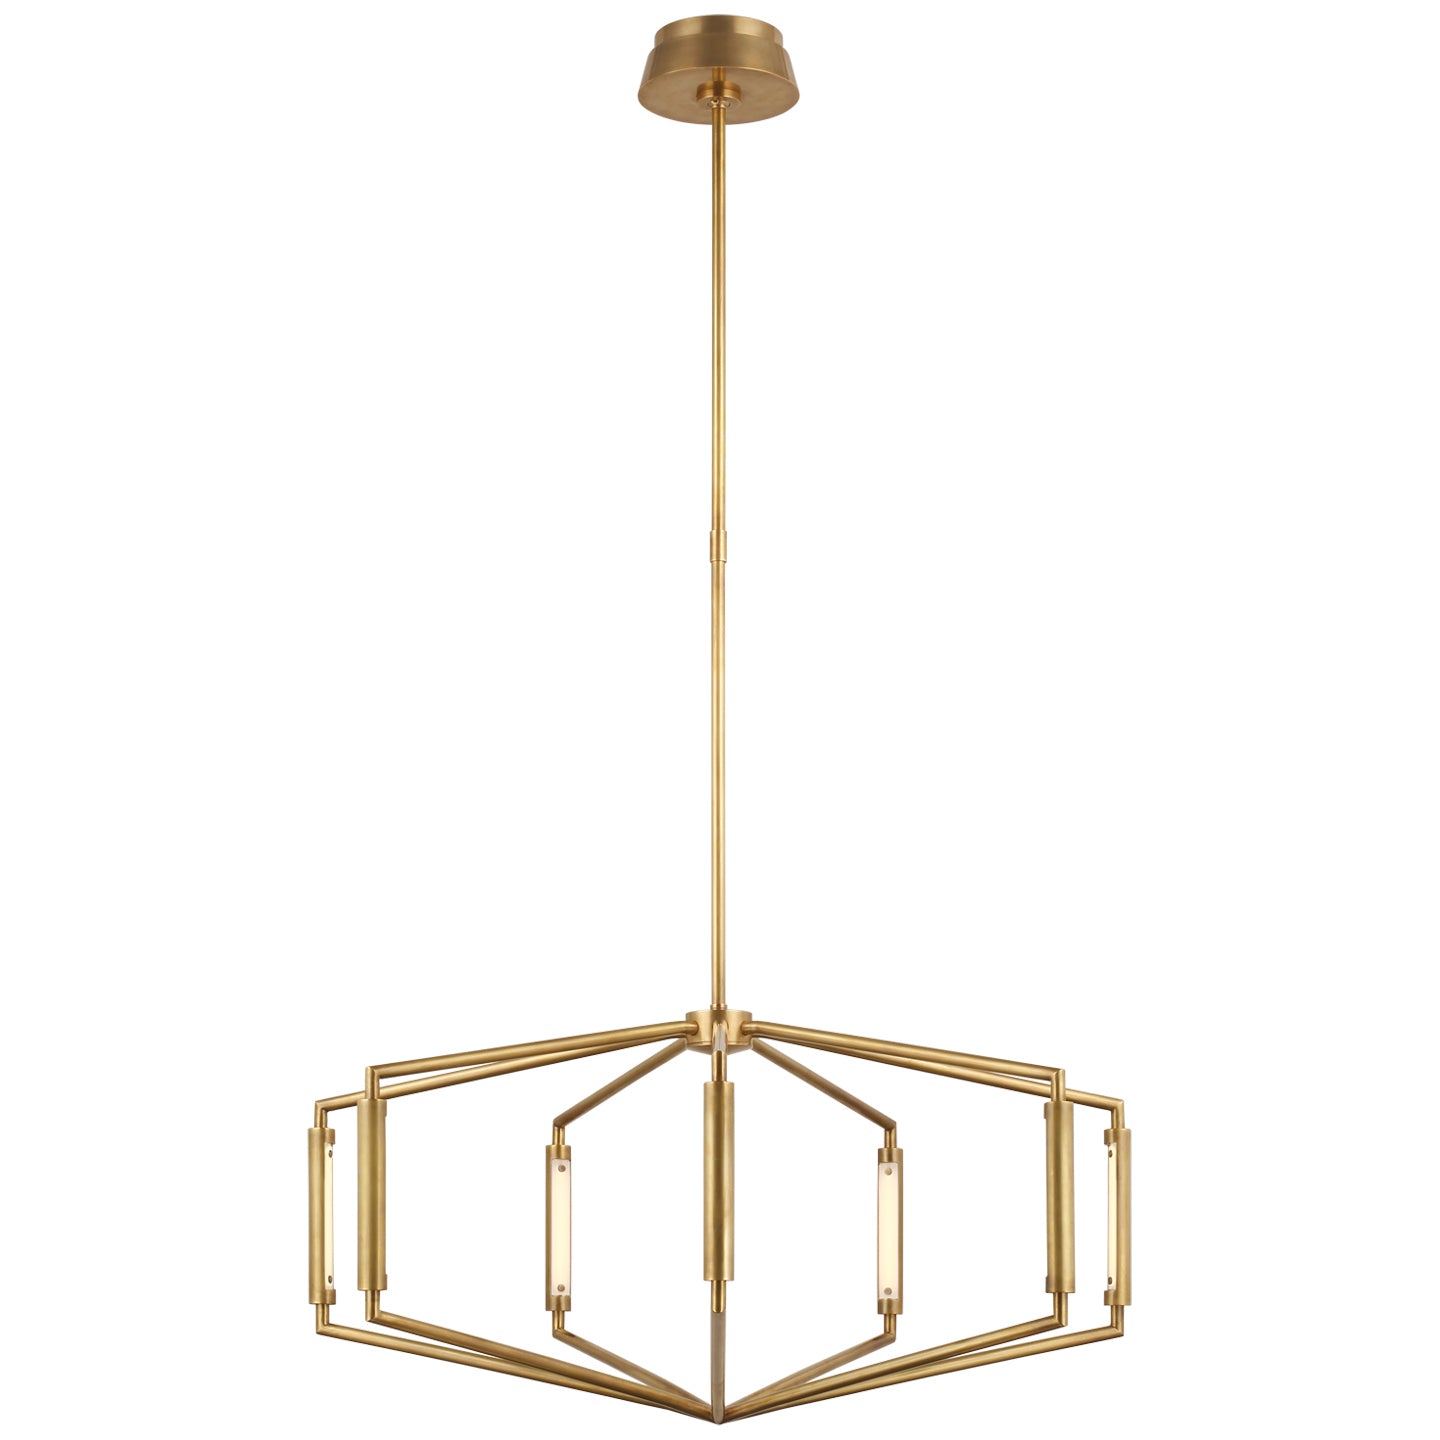 Load image into Gallery viewer, Visual Comfort Signature - KW 5706AB - LED Chandelier - Appareil - Antique-Burnished Brass
